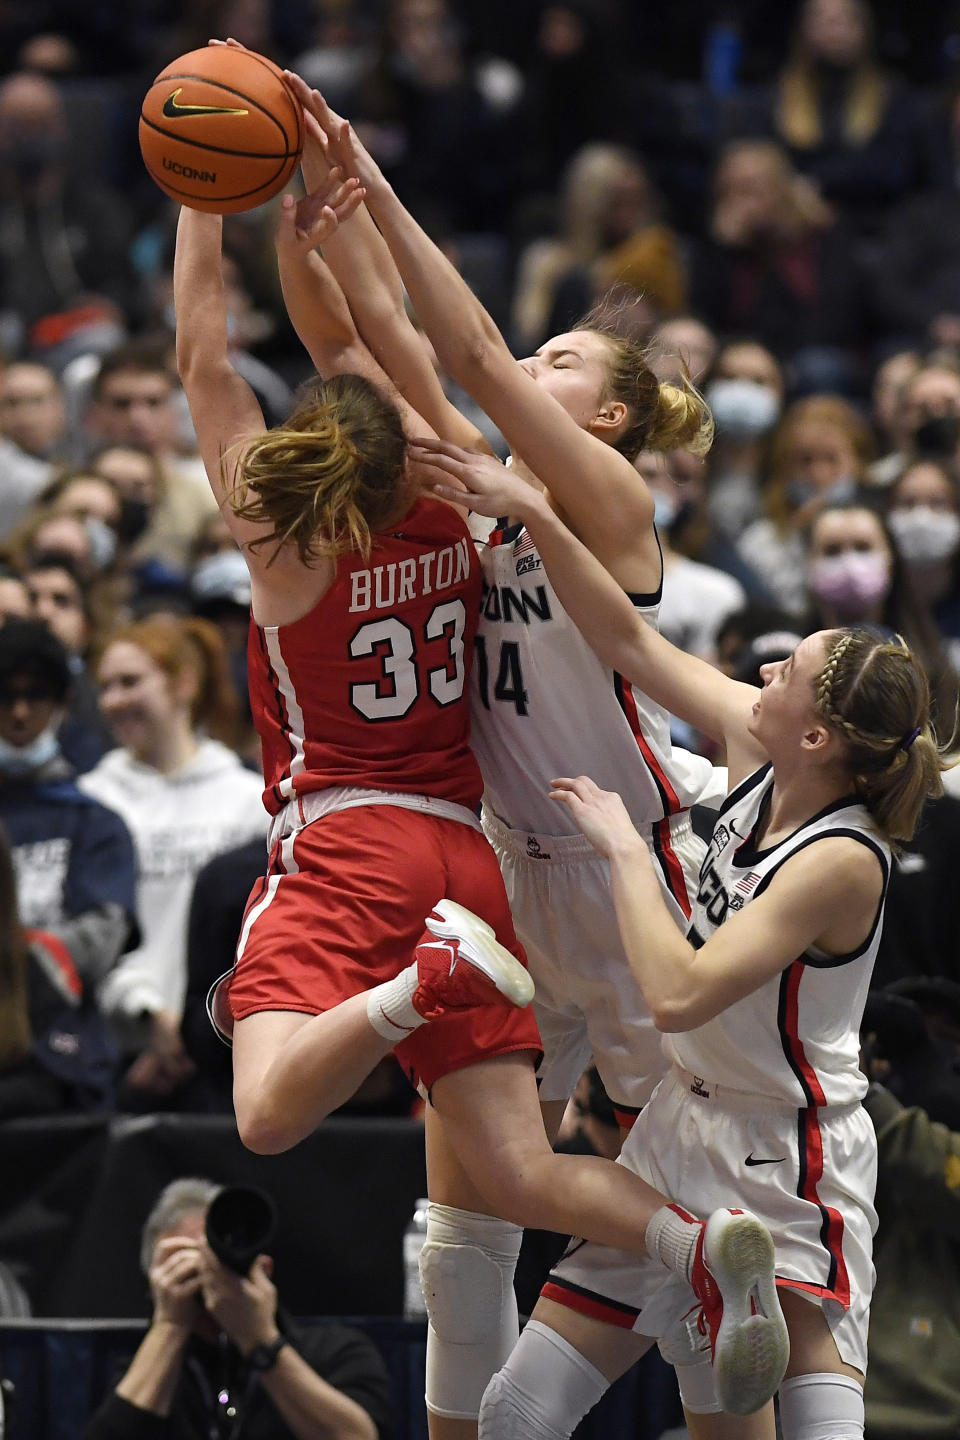 Connecticut's Dorka Juhasz, center, blocks a shot by St. John's Katie Burton (33) as Connecticut's Paige Bueckers defends during the second half of an NCAA college basketball game Friday, Feb. 25, 2022, in Hartford, Conn. (AP Photo/Jessica Hill)